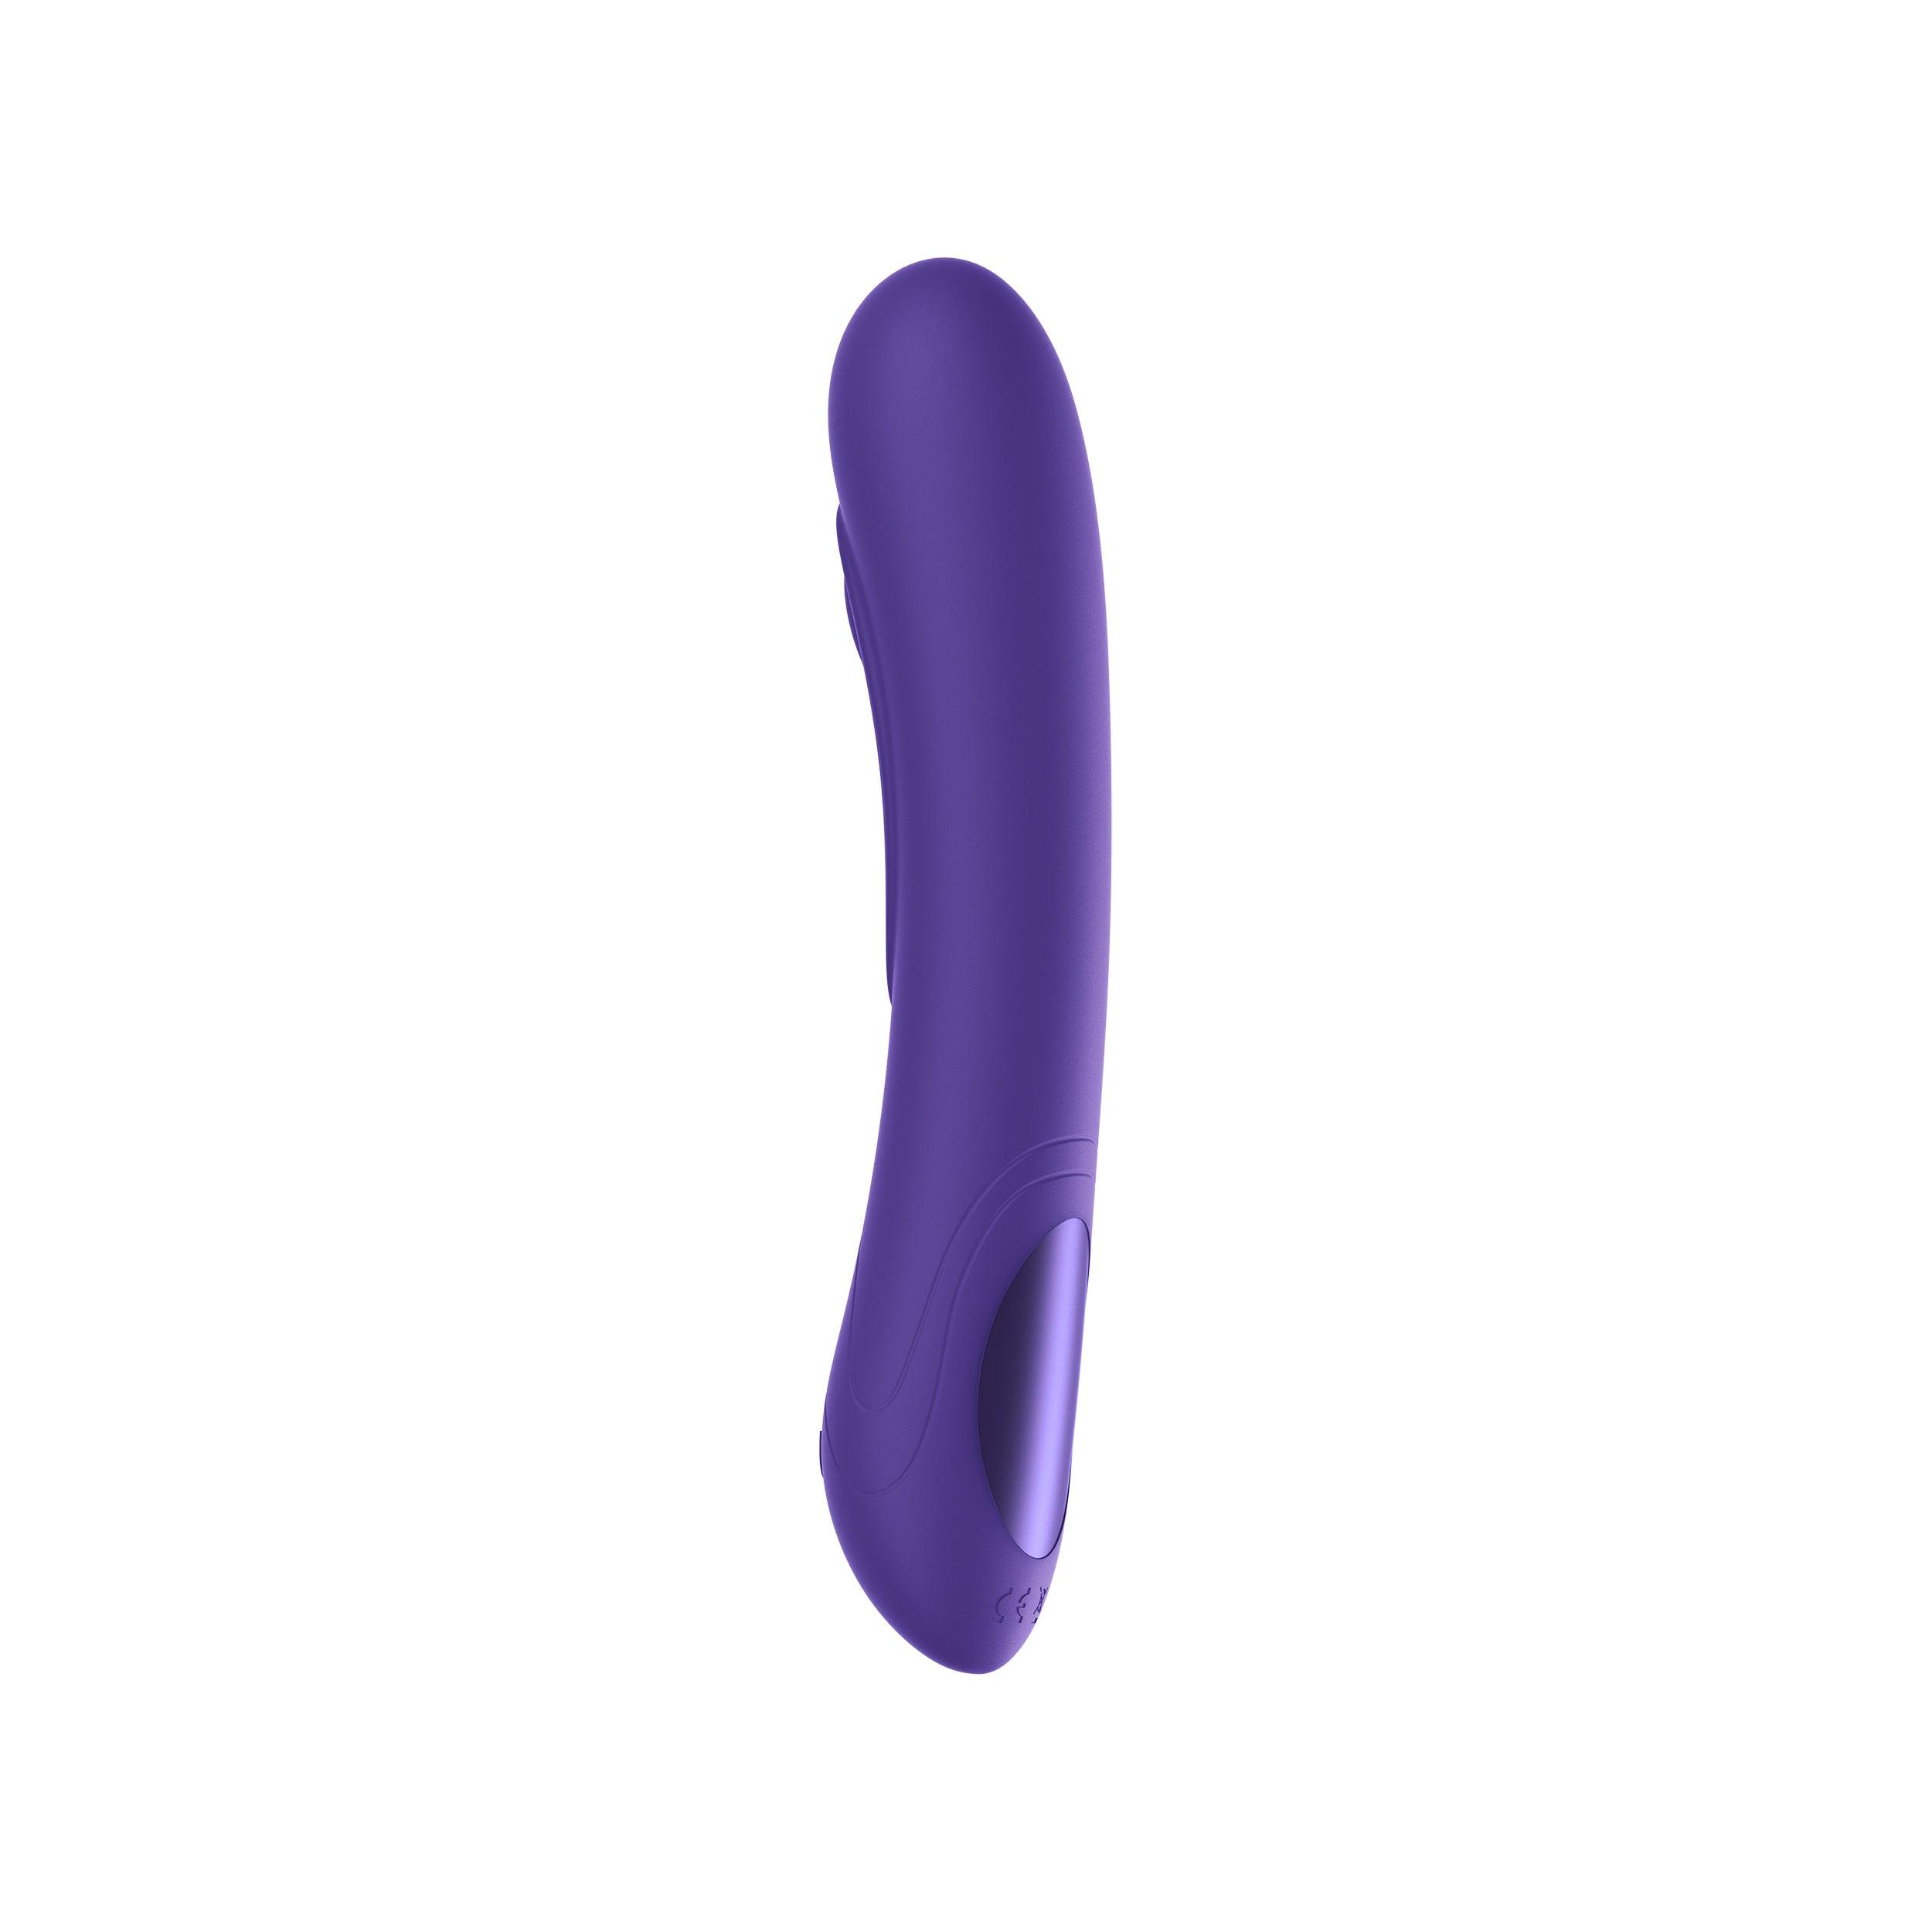 Kiiroo Pearl 3 G Spot Vibrator - Buy At Luxury Toy X - Free 3-Day Shipping